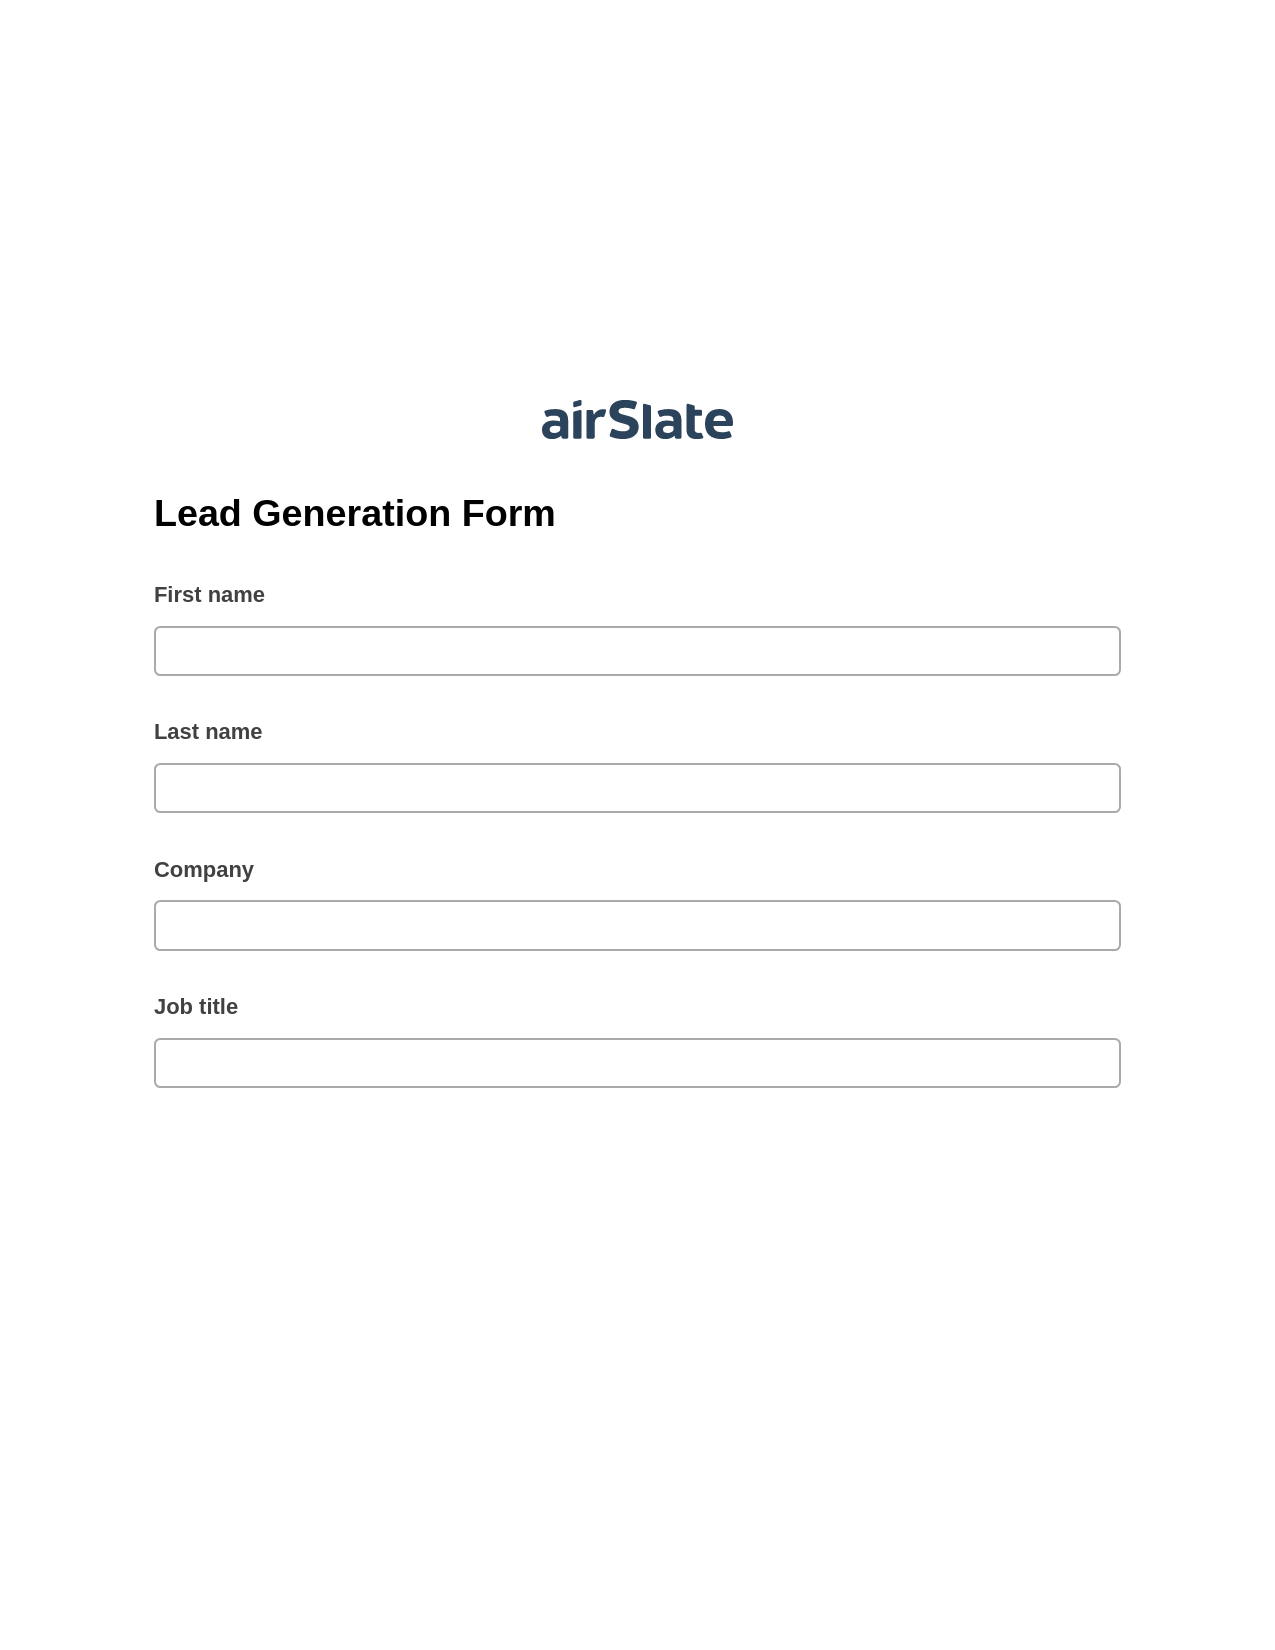 Lead Generation Form Pre-fill from Salesforce Records with SOQL Bot, Create Salesforce Records Bot, Archive to SharePoint Folder Bot